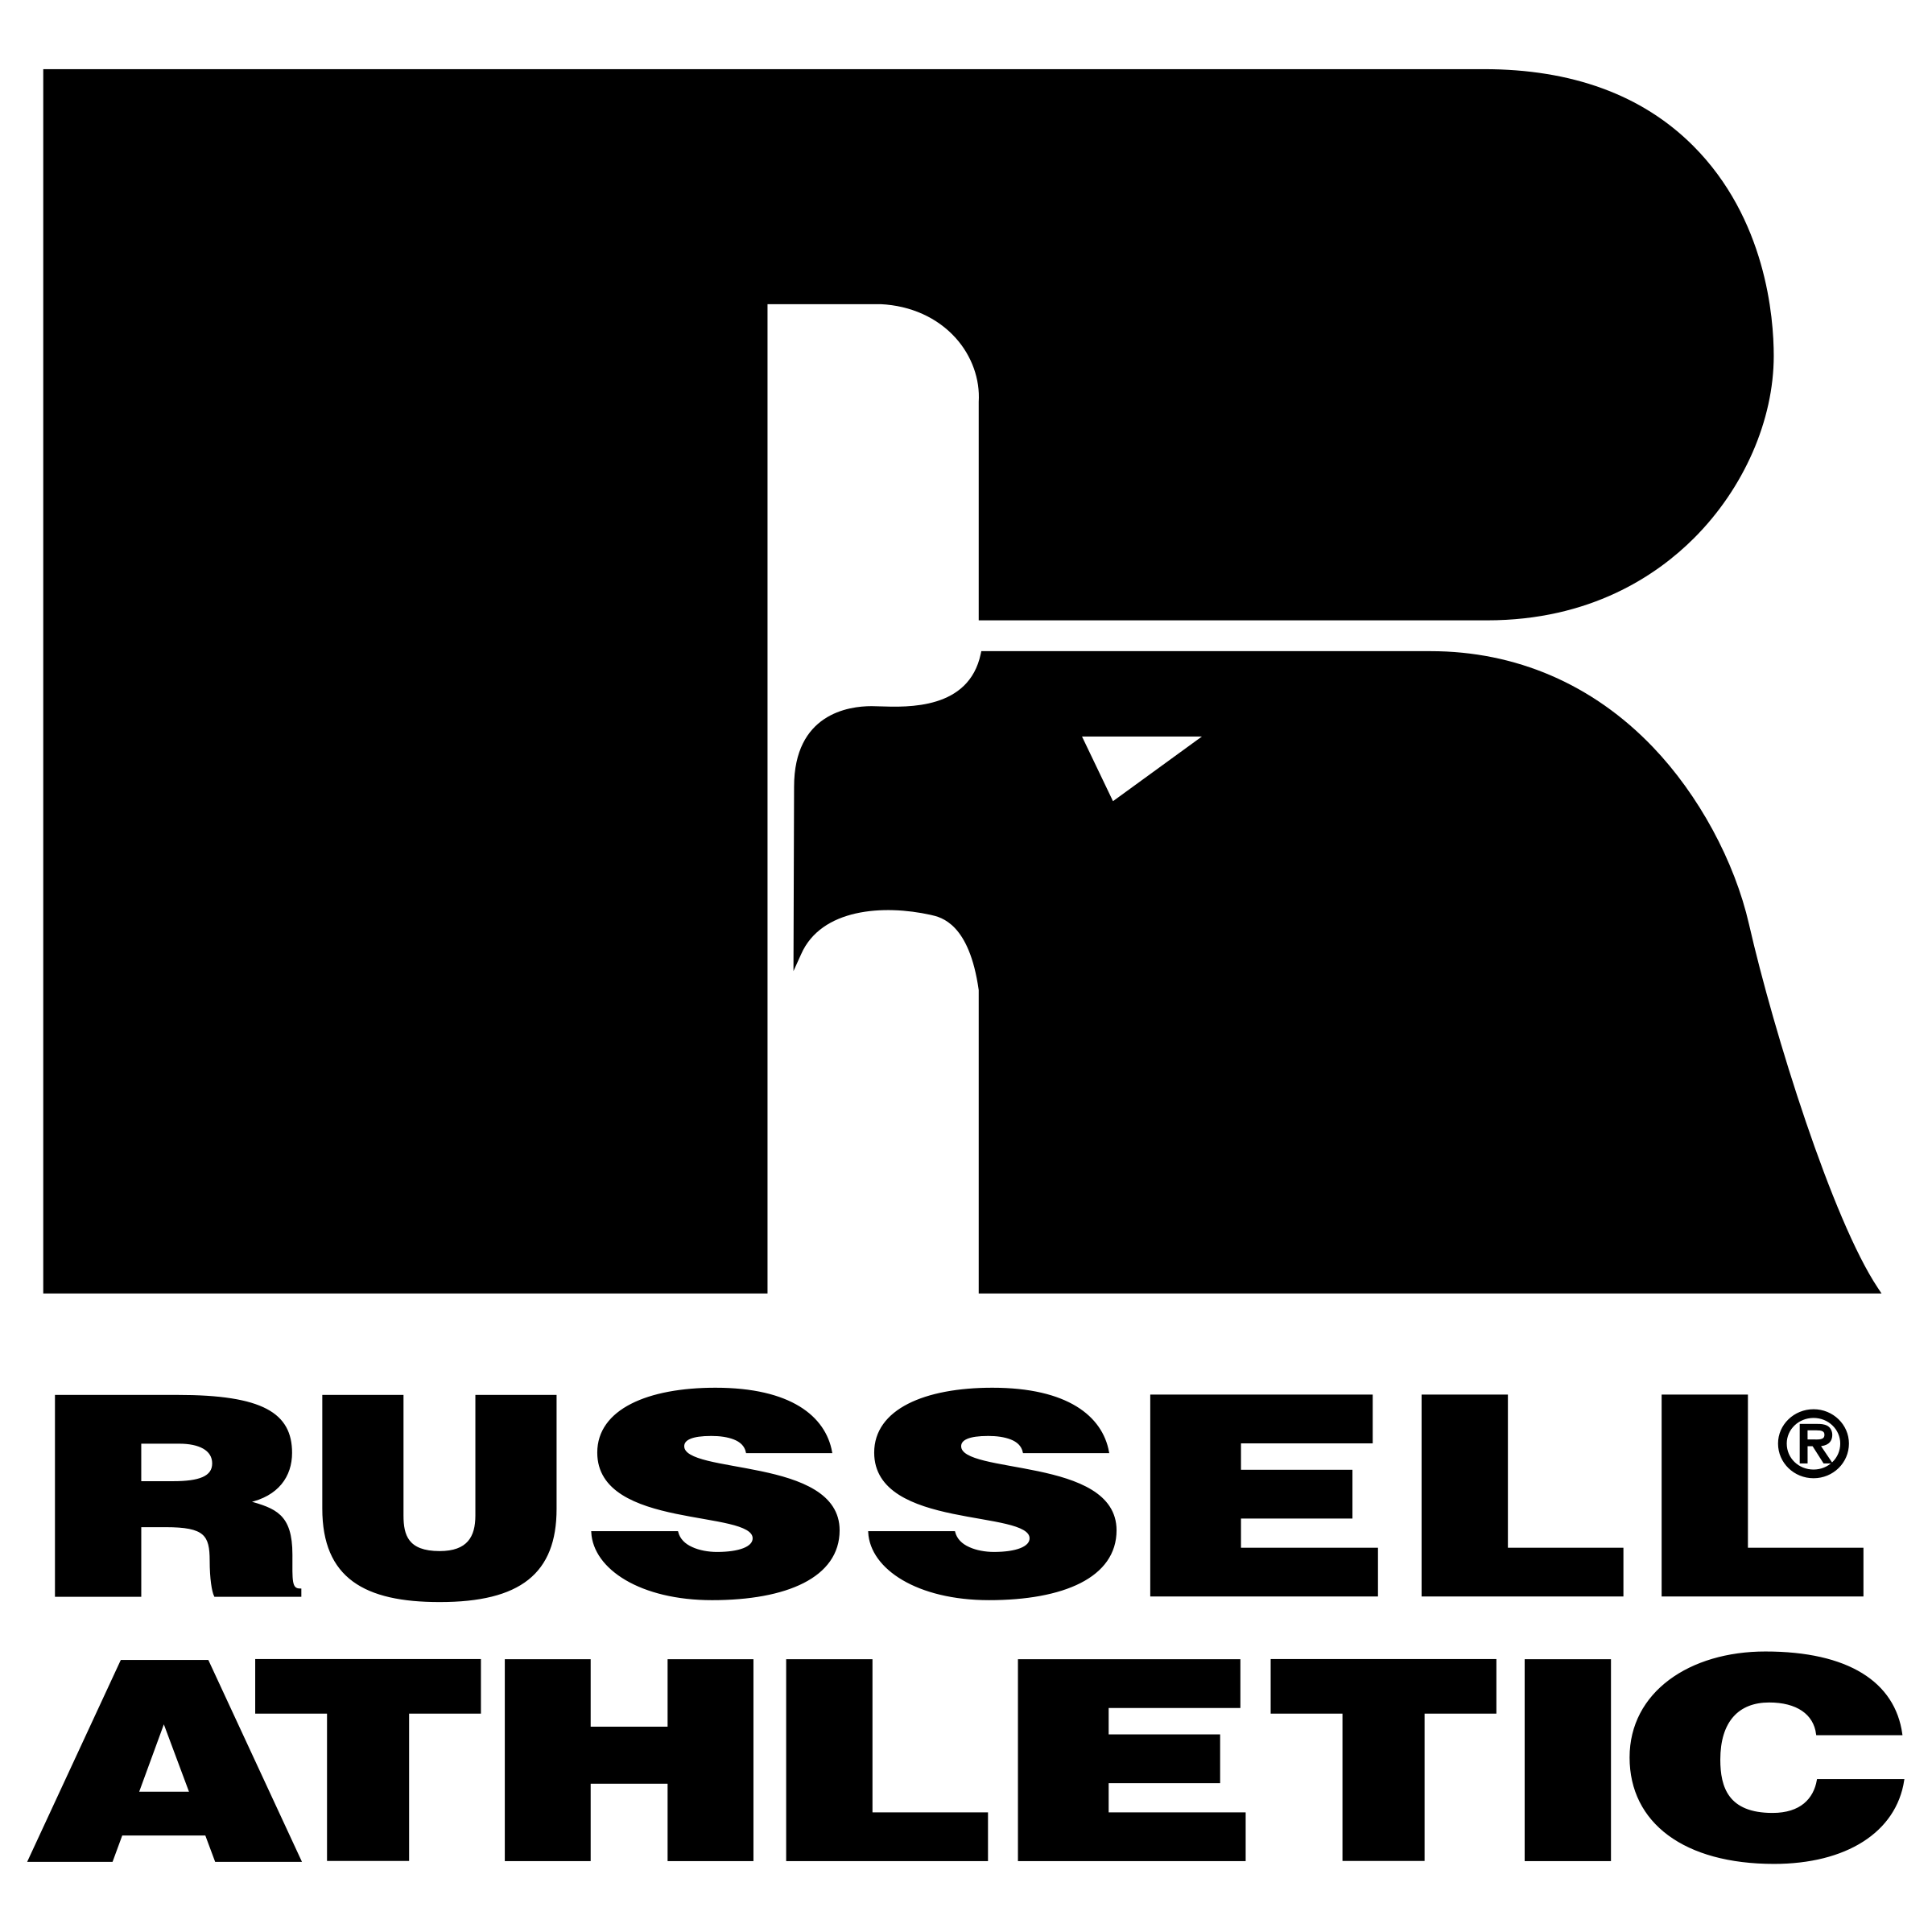 Russell Logo - Russell Athletic Logo PNG Transparent & SVG Vector